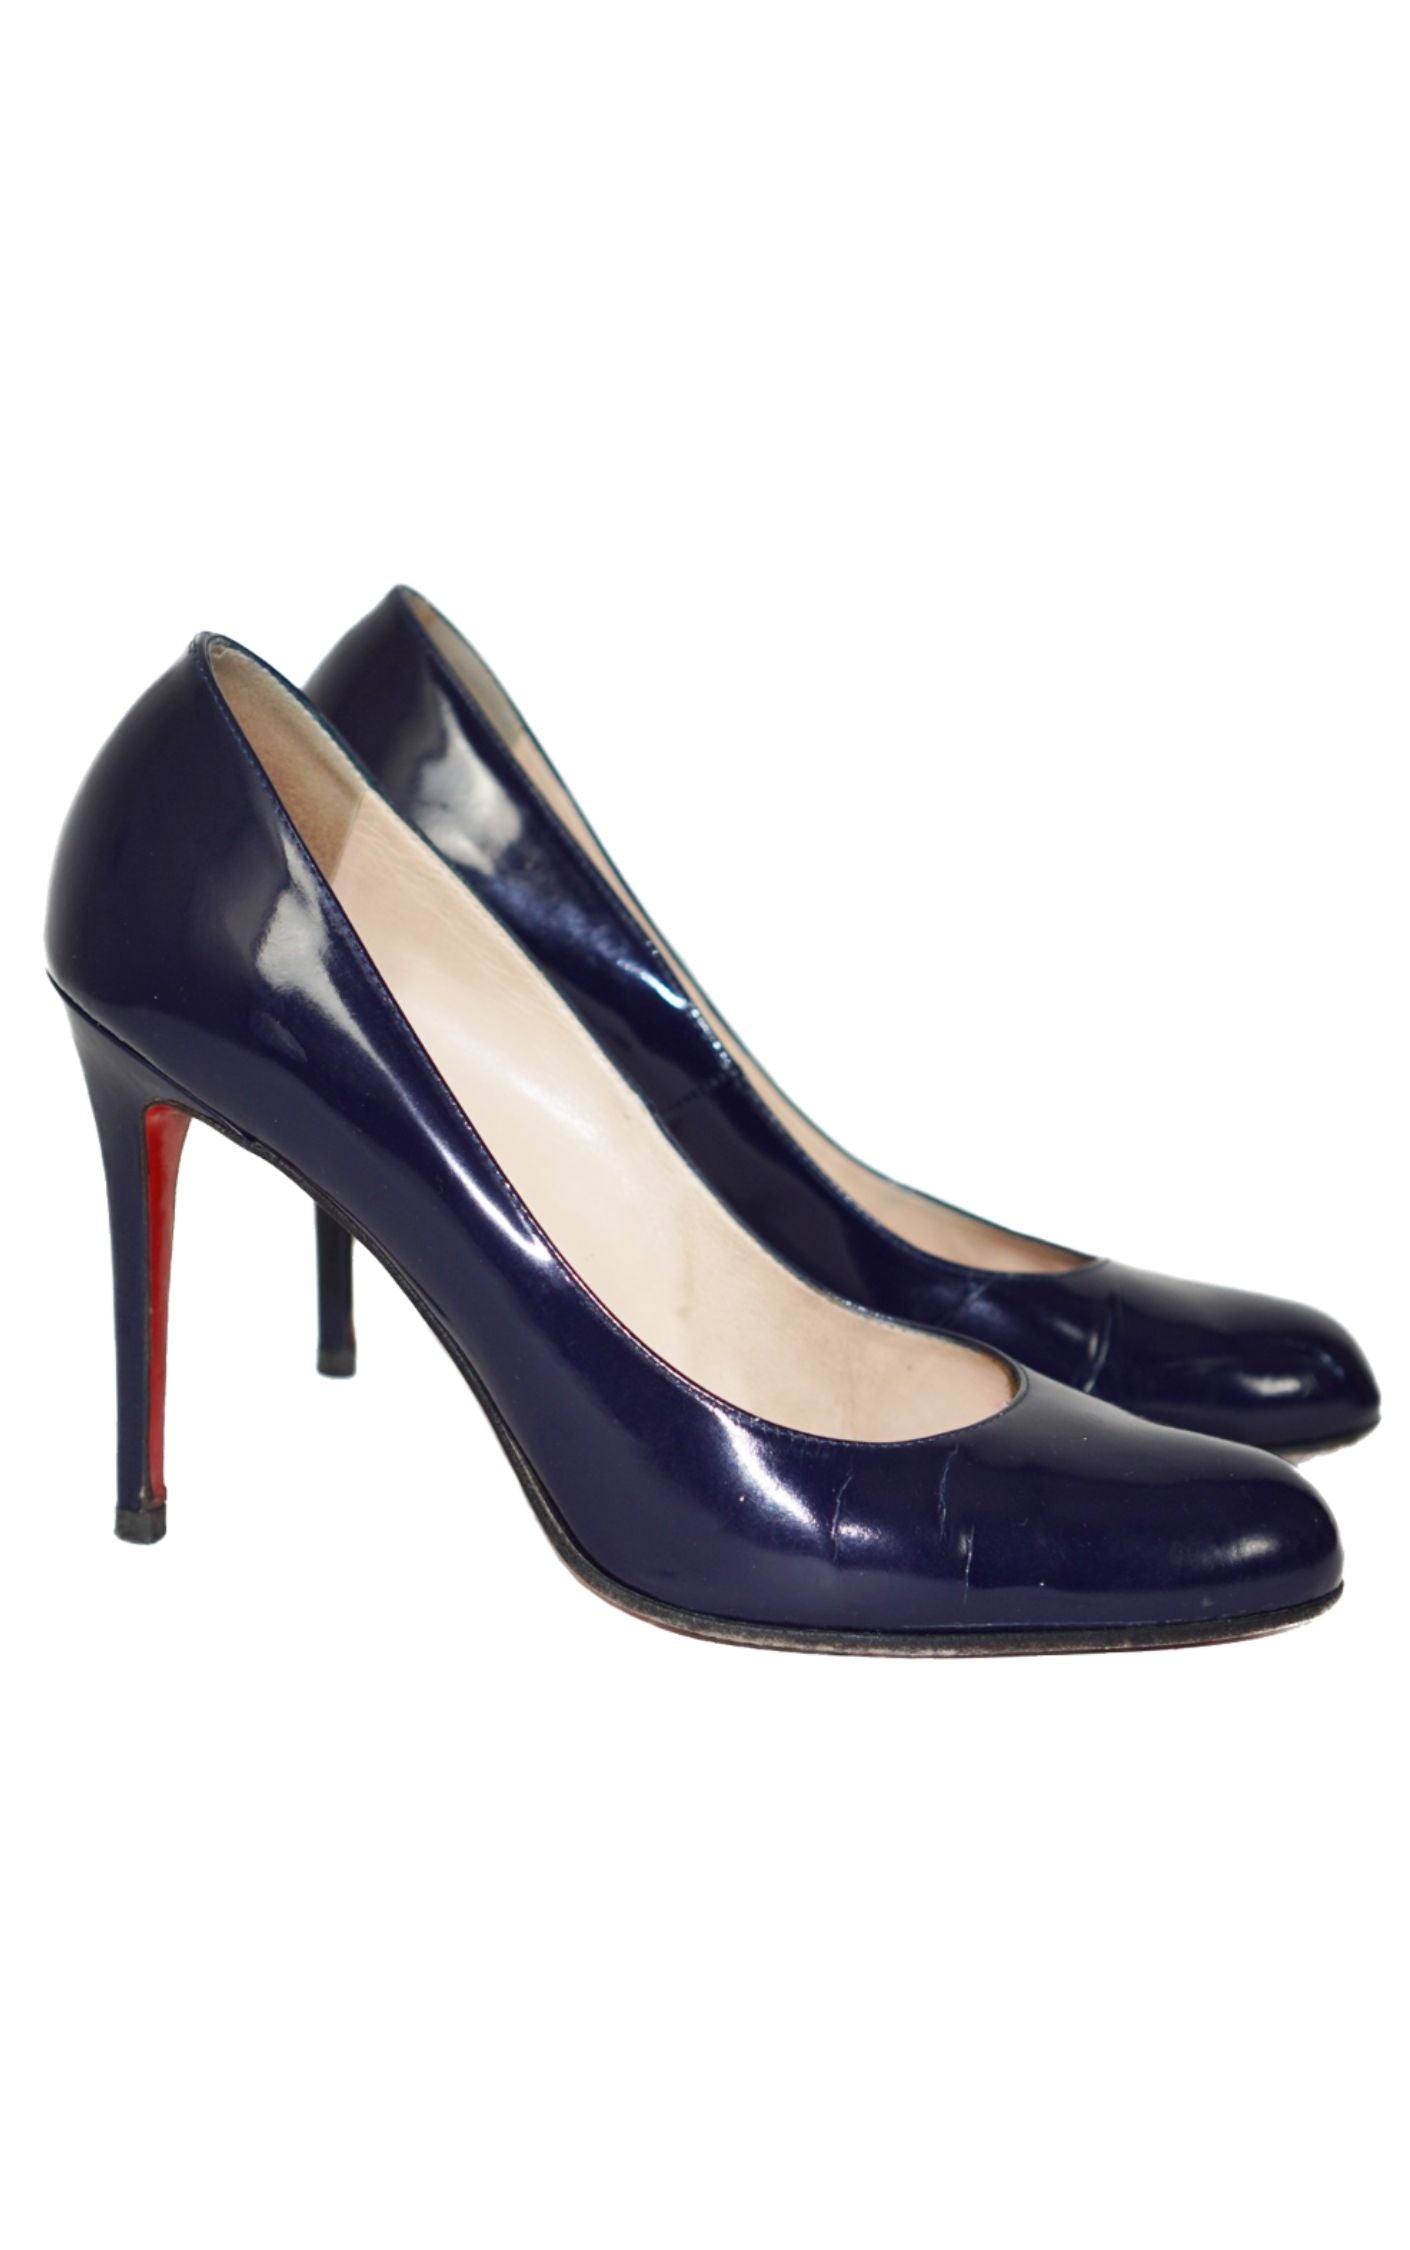 CHRISTIAN LOUBOUTIN Patent Leather Navy Simple Pumps resellum